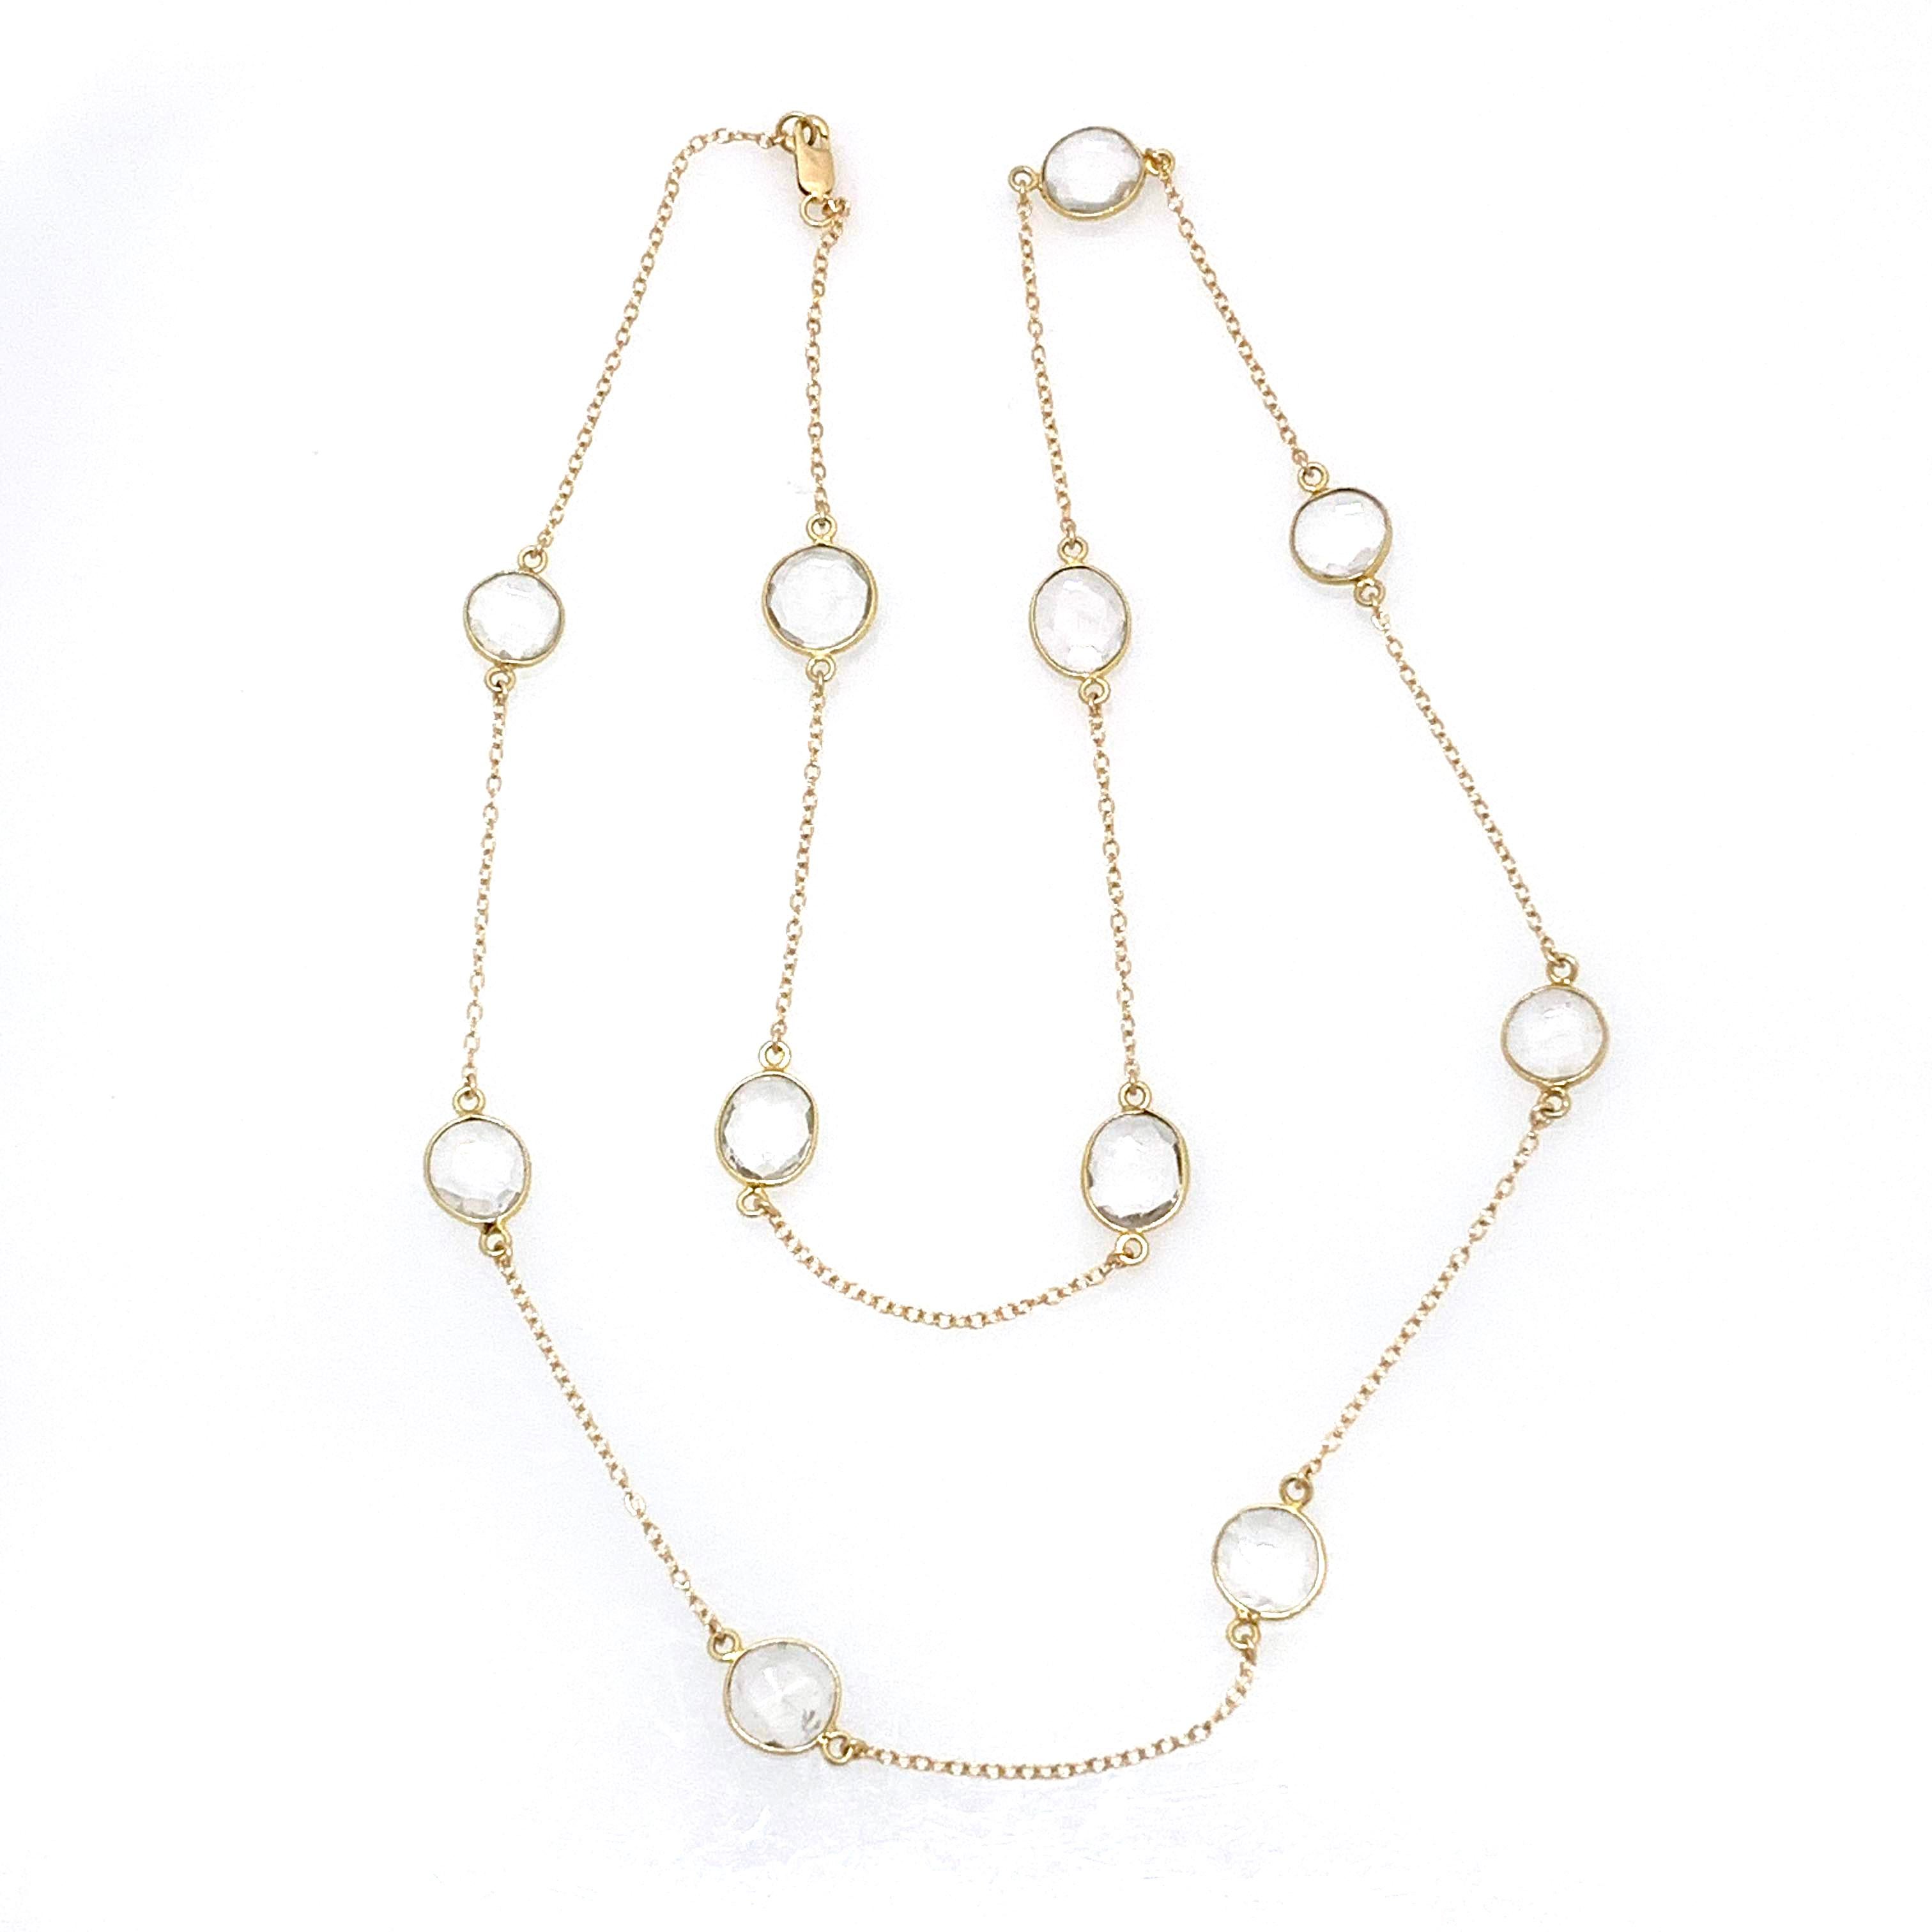 This 14k gold filled rose cut clear quartz station necklace is such a beautiful piece! 

A long and elegant fine 14k gold filled chain is embellished with hand bezel-set double facet rose cut clear quartz every 1.5